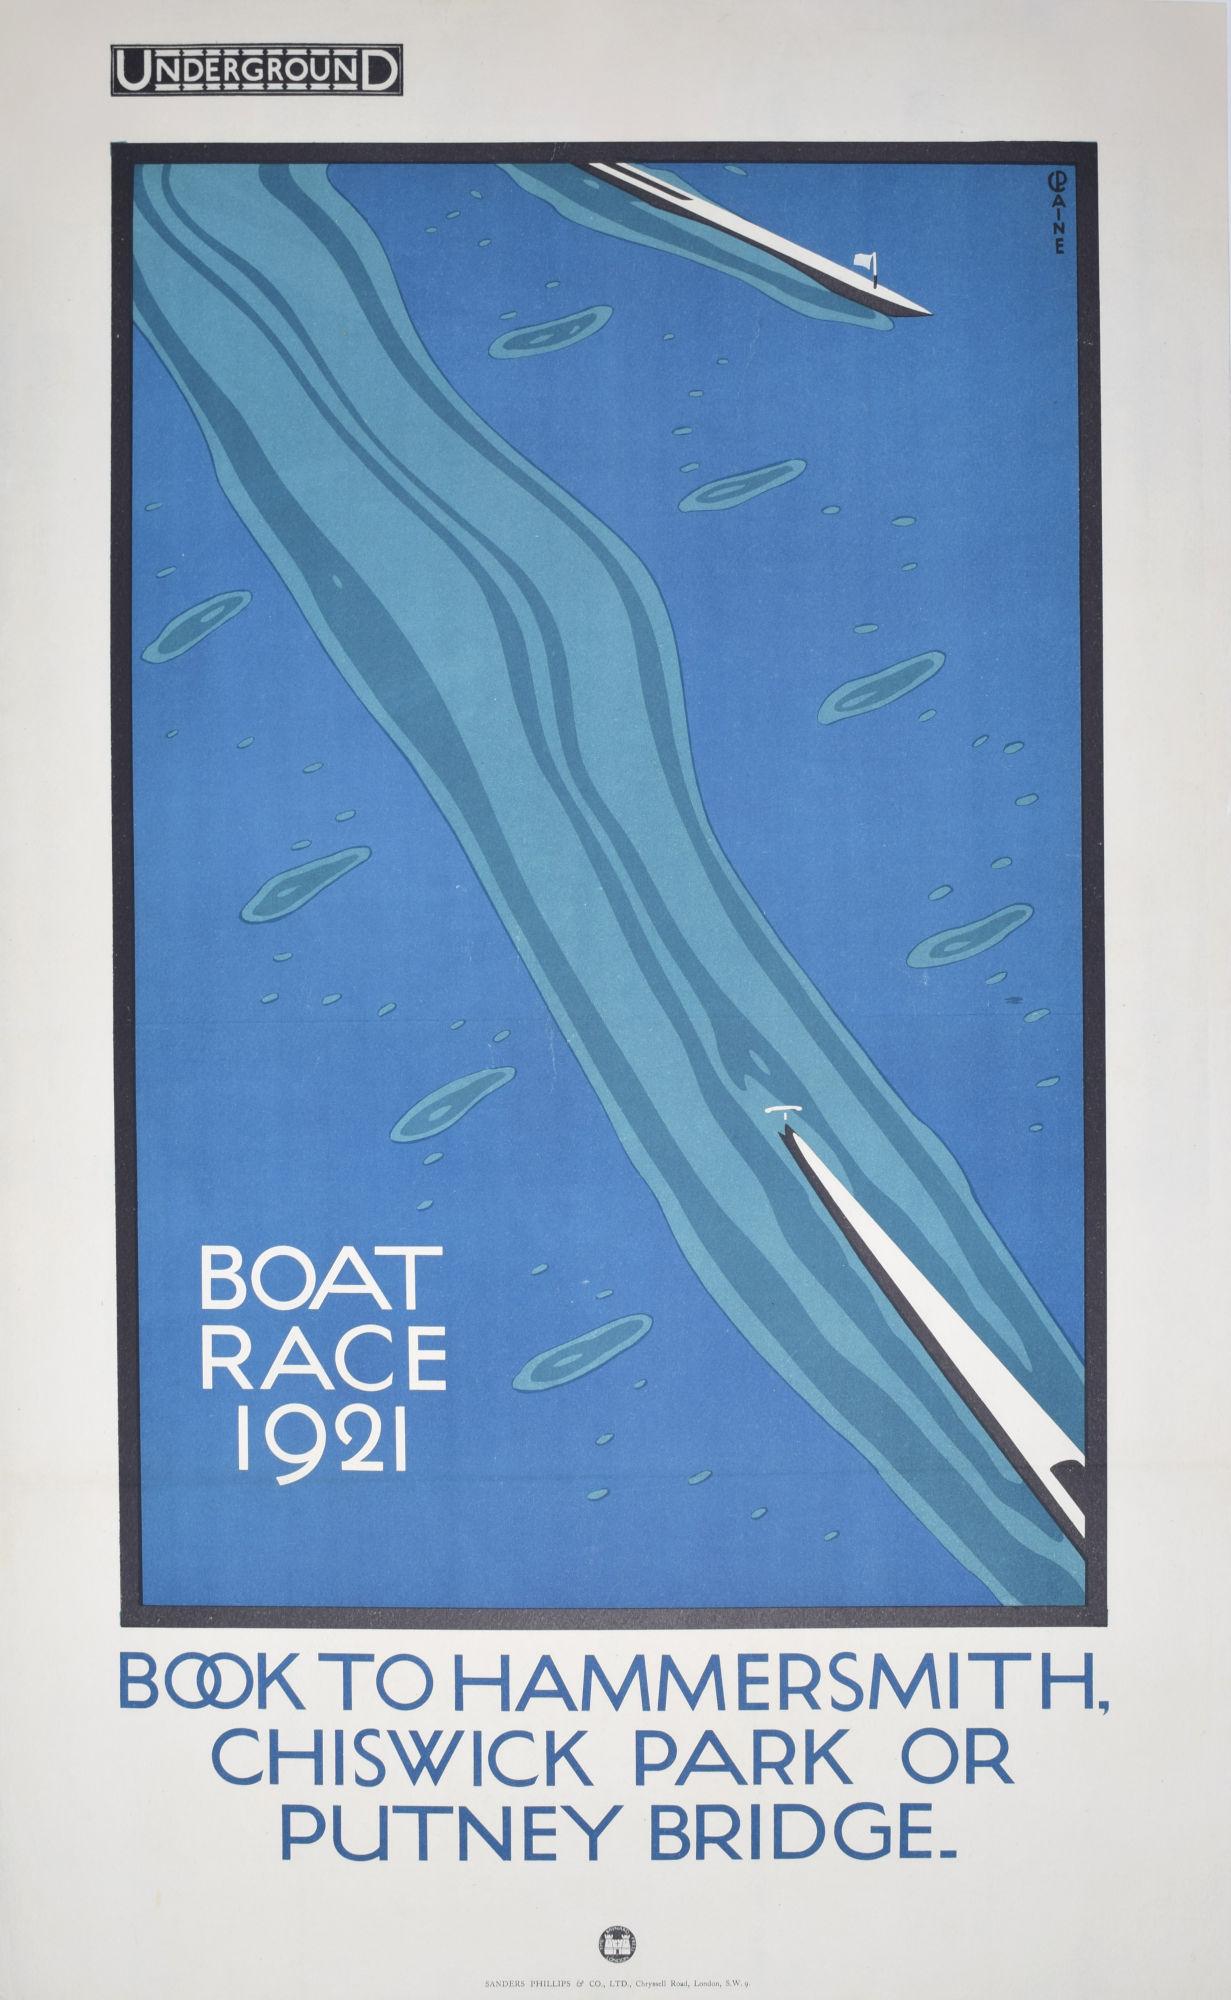 To see our other original vintage posters, scroll down to "More from this Seller" and below it click on "See all from this Seller" - or send us a message if you cannot find the poster you want.

Charles Paine (1895 - 1967)
Boat Race